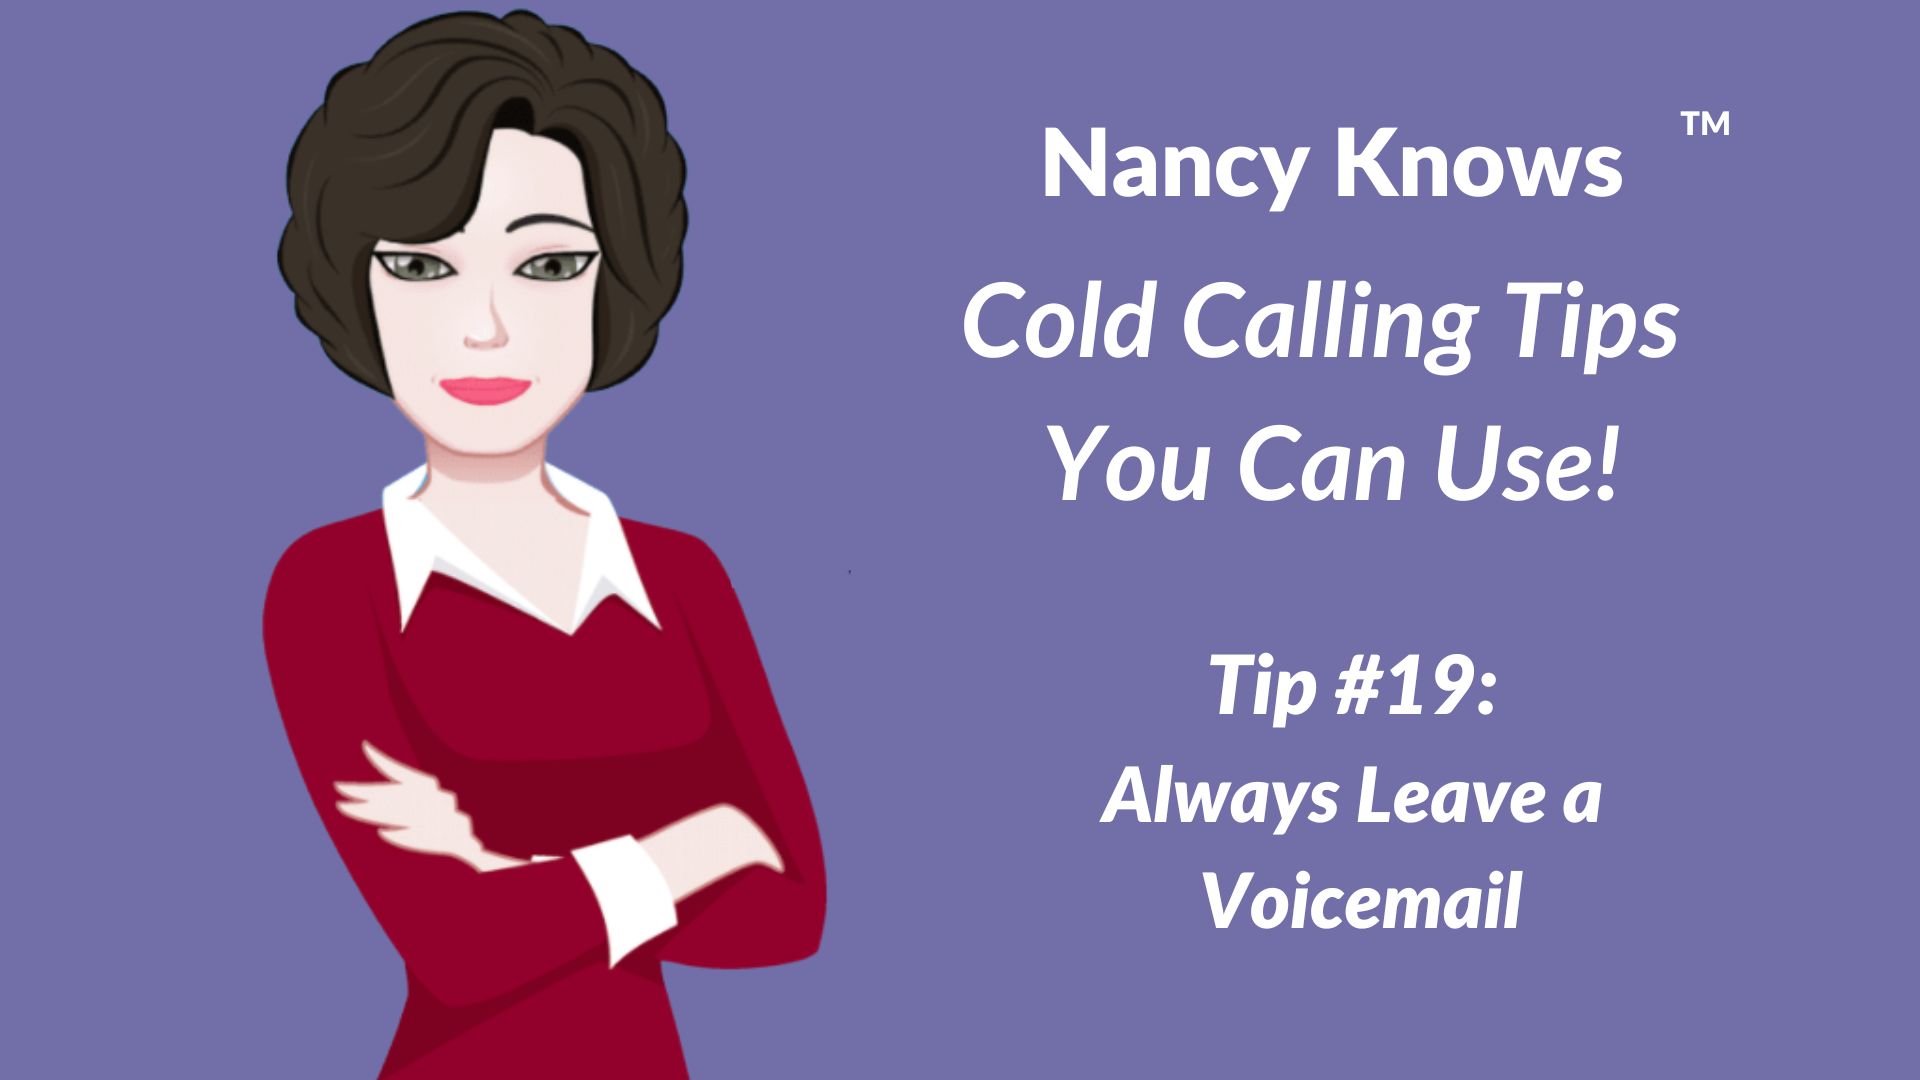 Nancy Knows #19 Always Leave a Voicemail